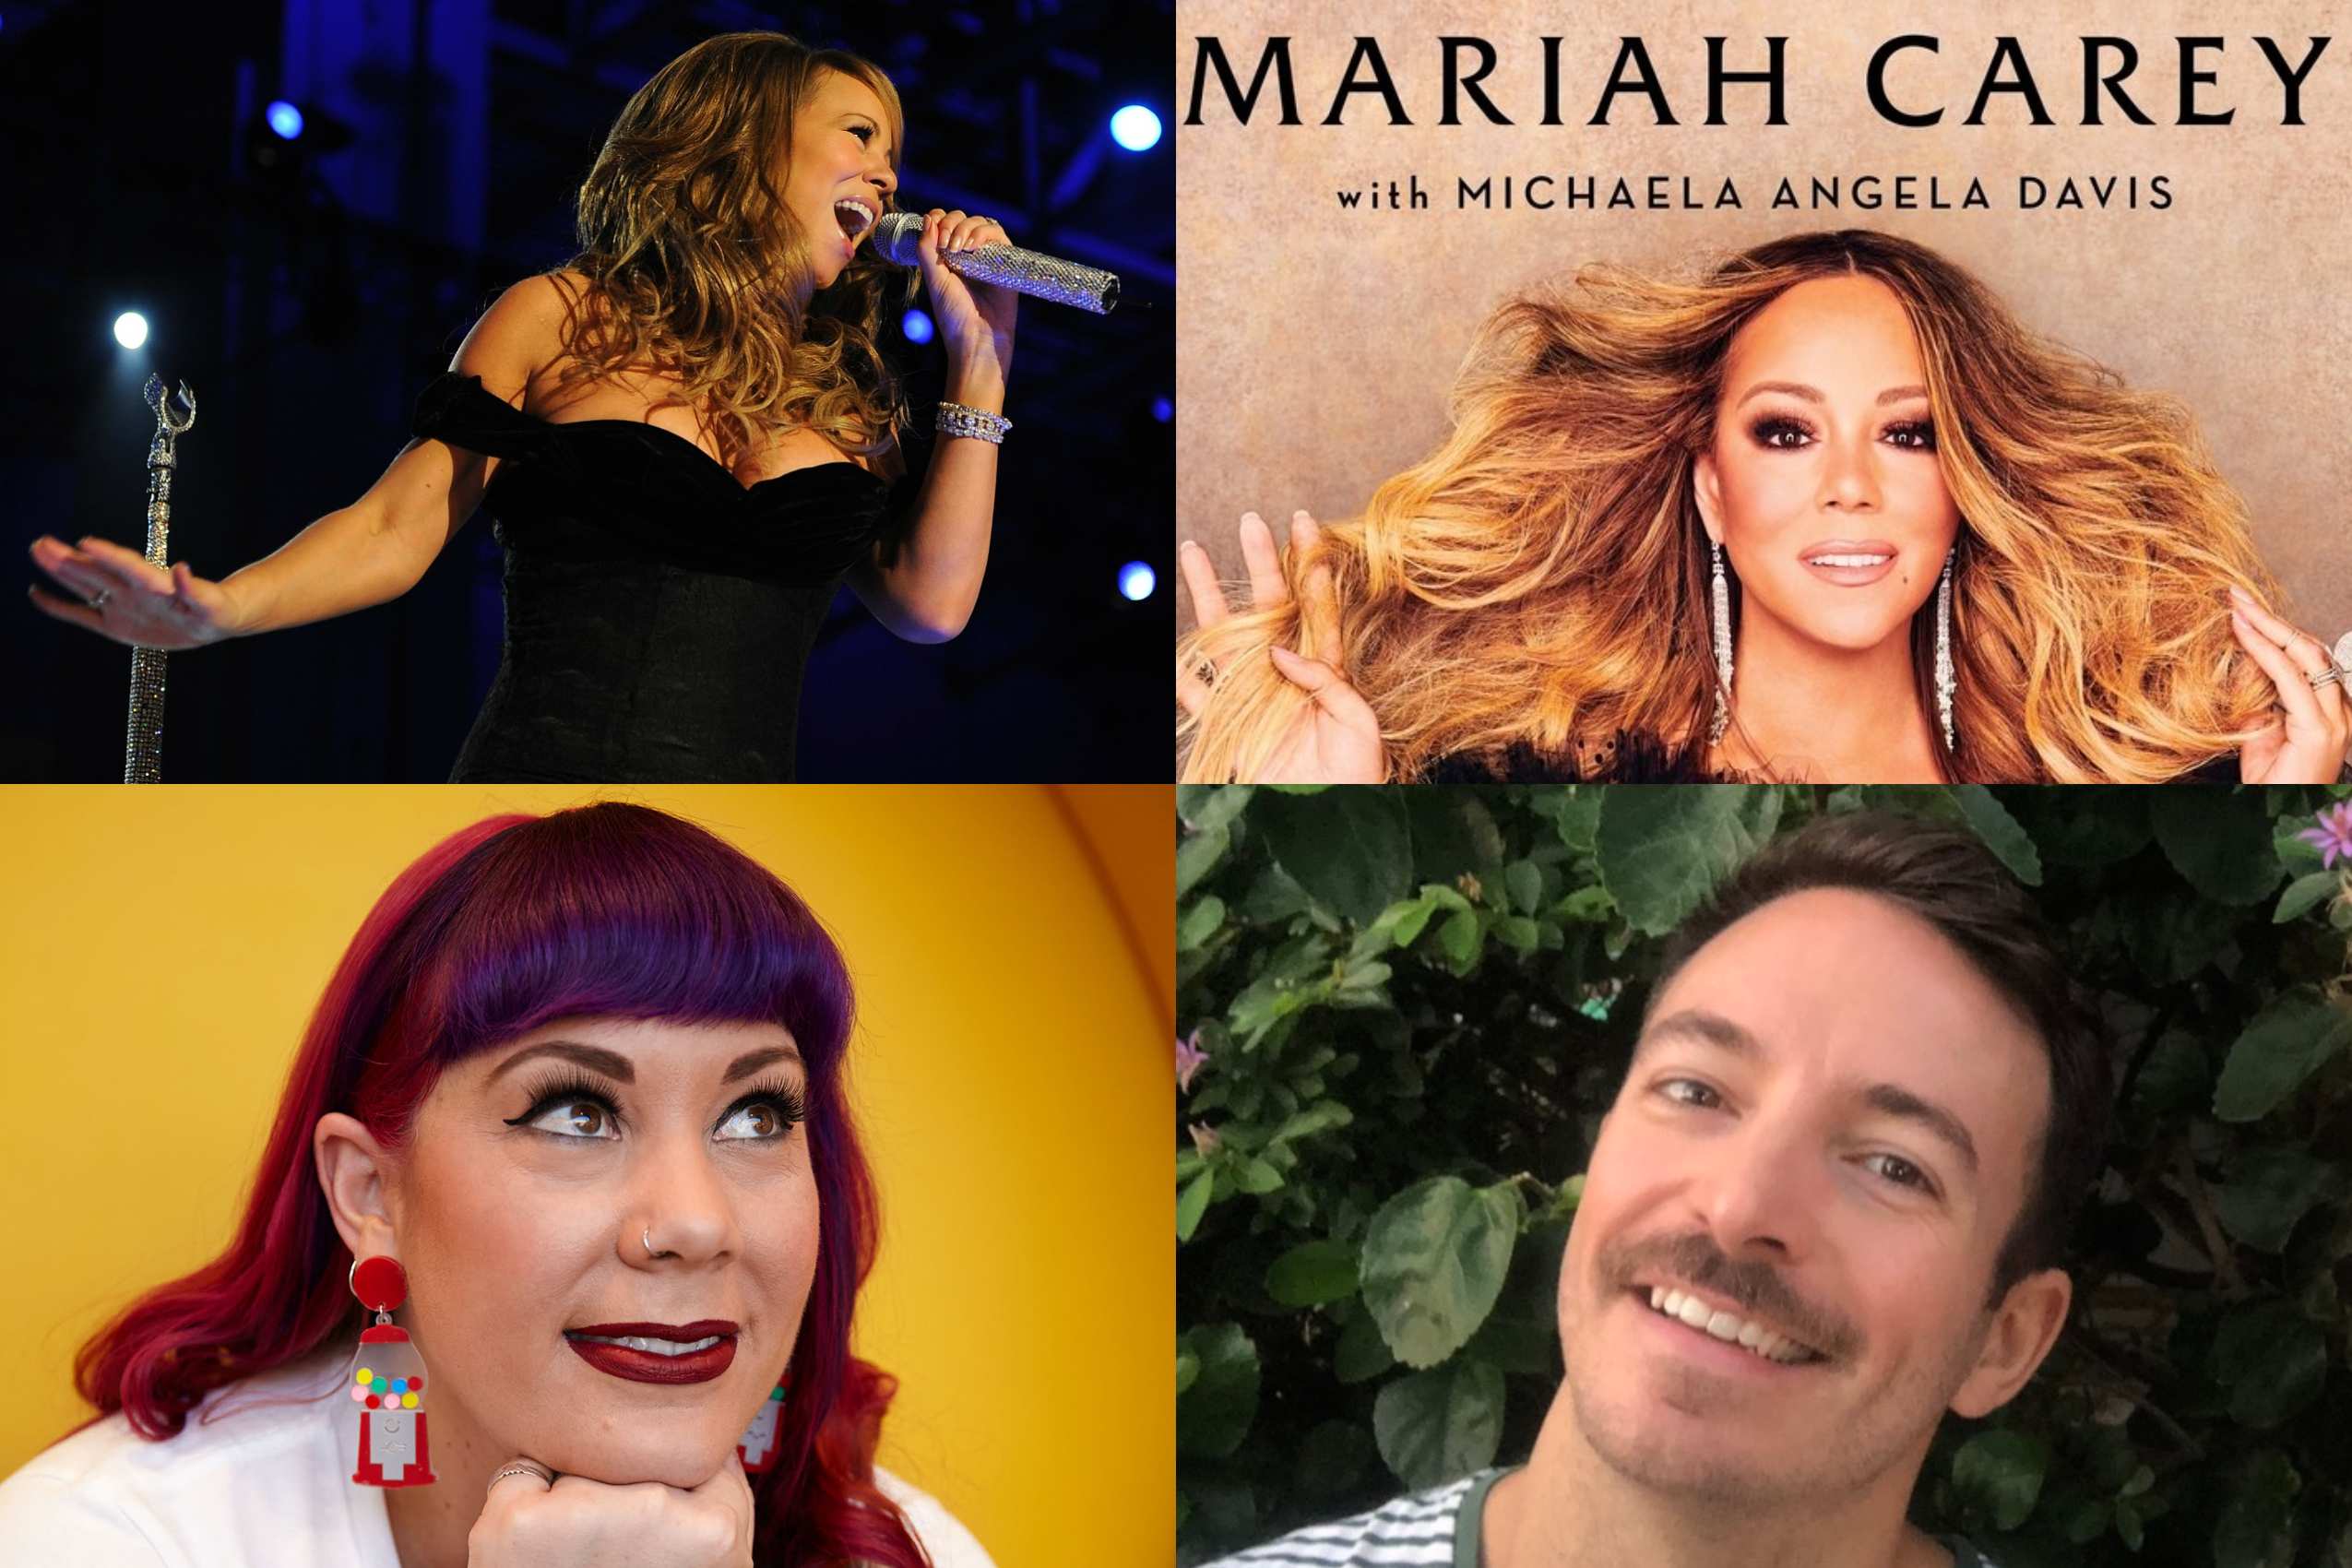 Stop Everything celebrity memoir book club: The meaning of Mariah Carey